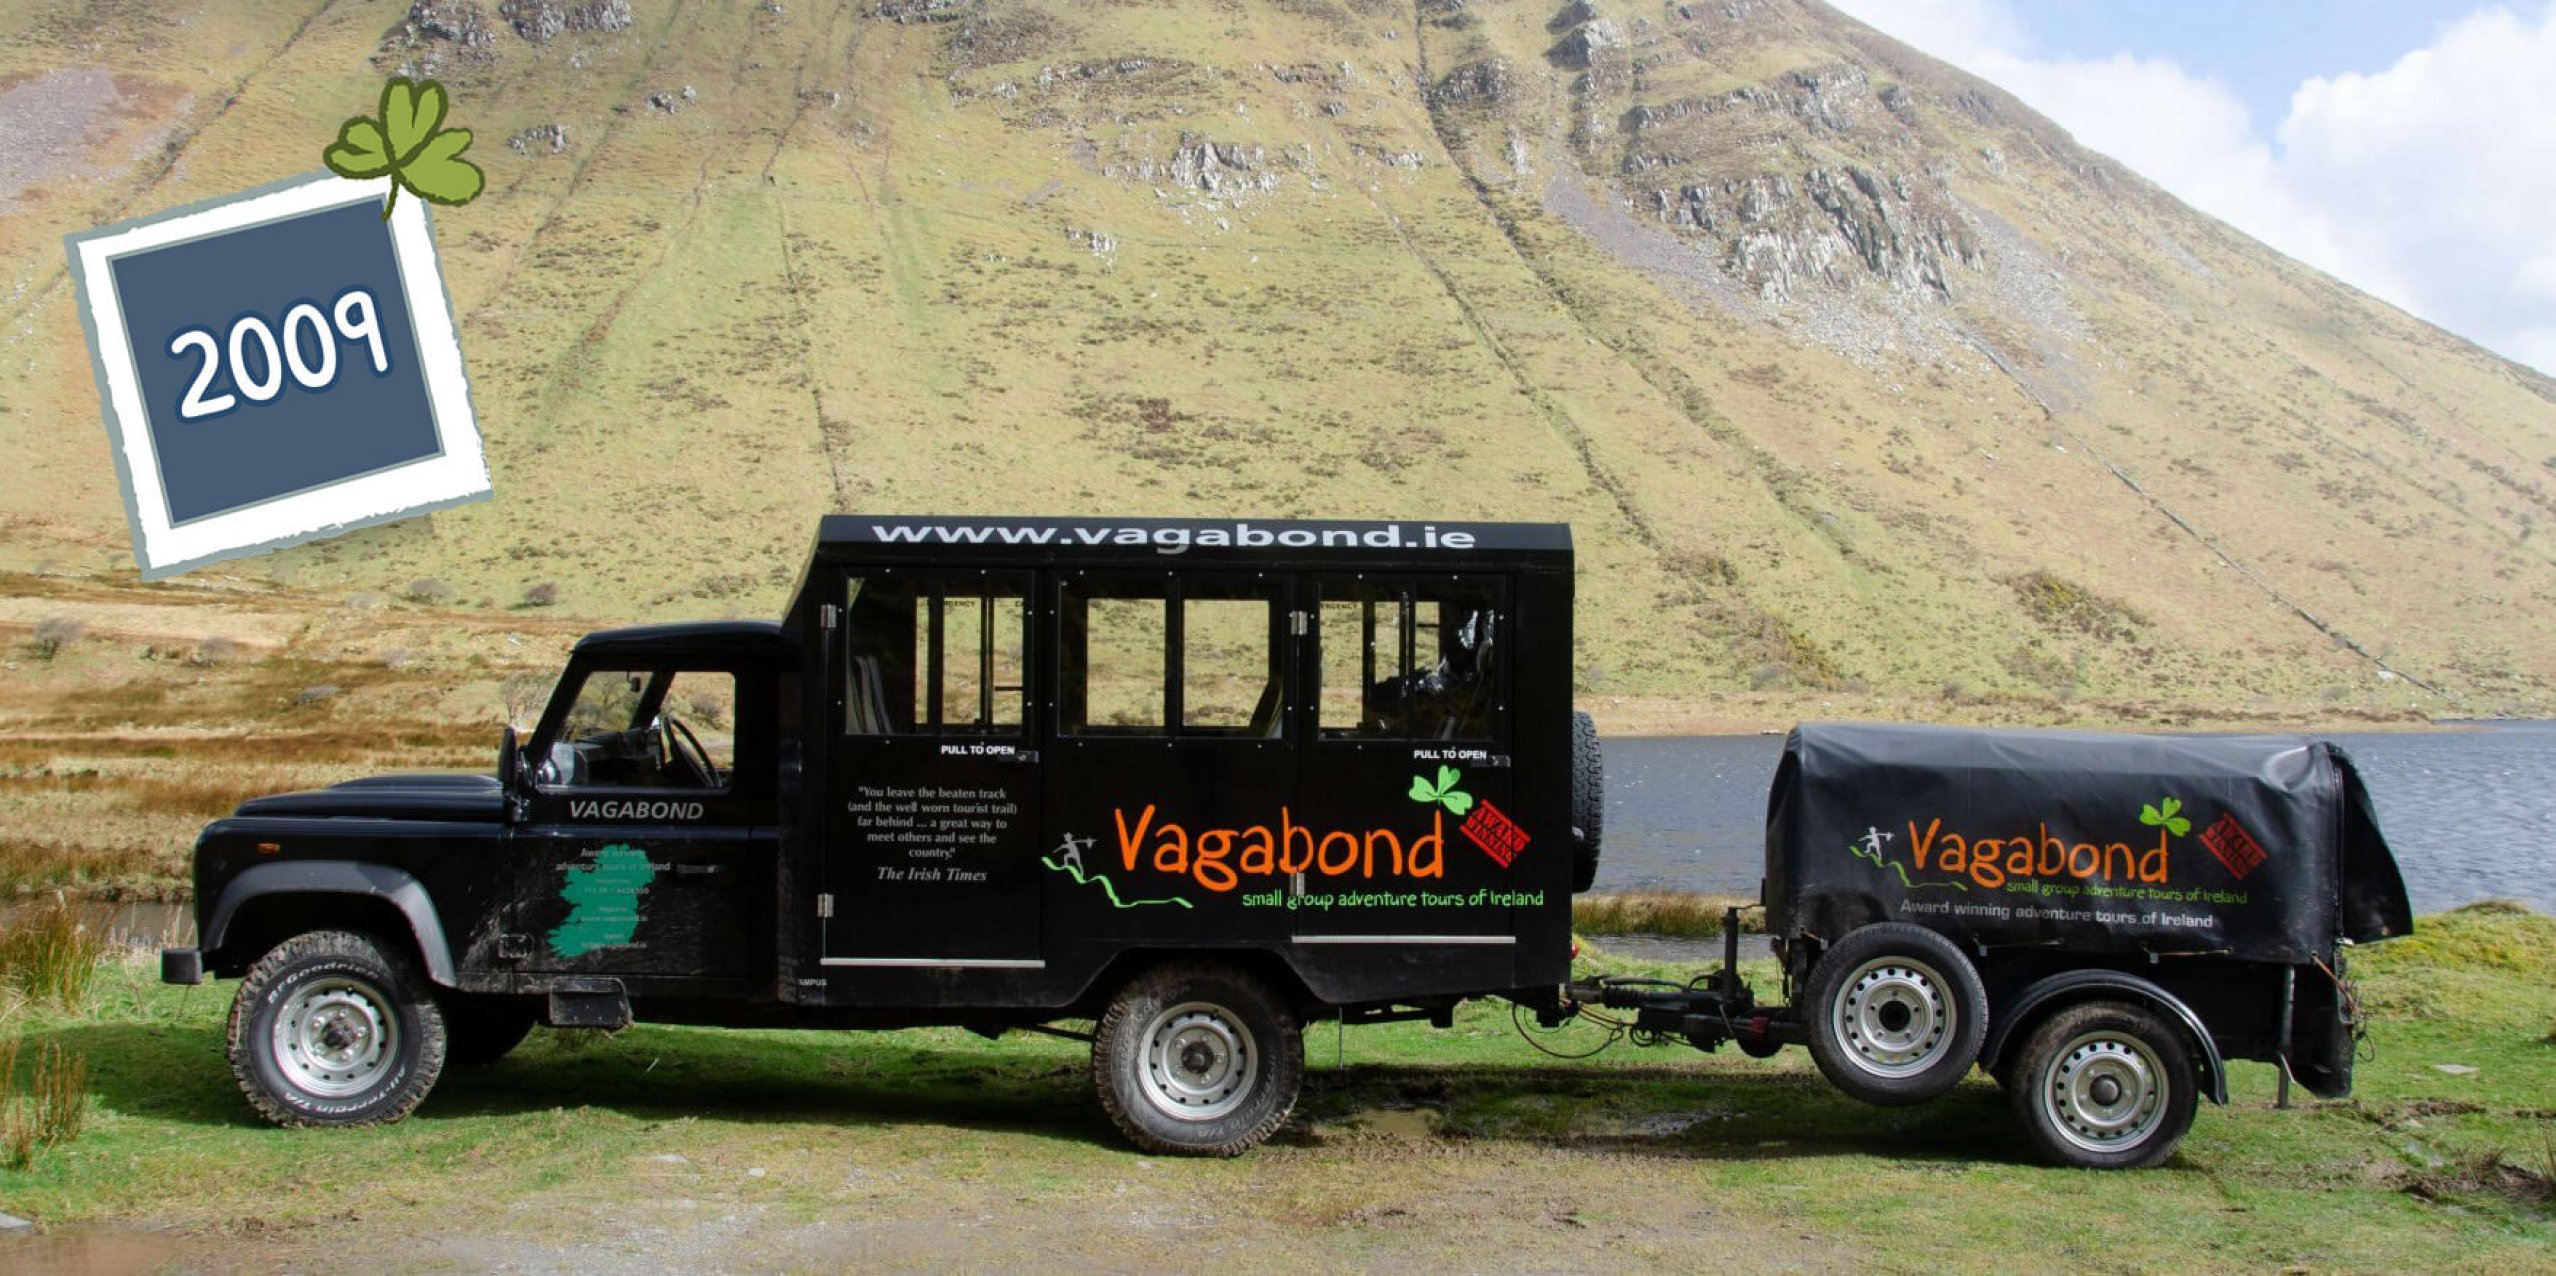 An original Land Rover Defender VagaTron tour vehicle with branded trailer parked in a scenic location in Ireland; side view